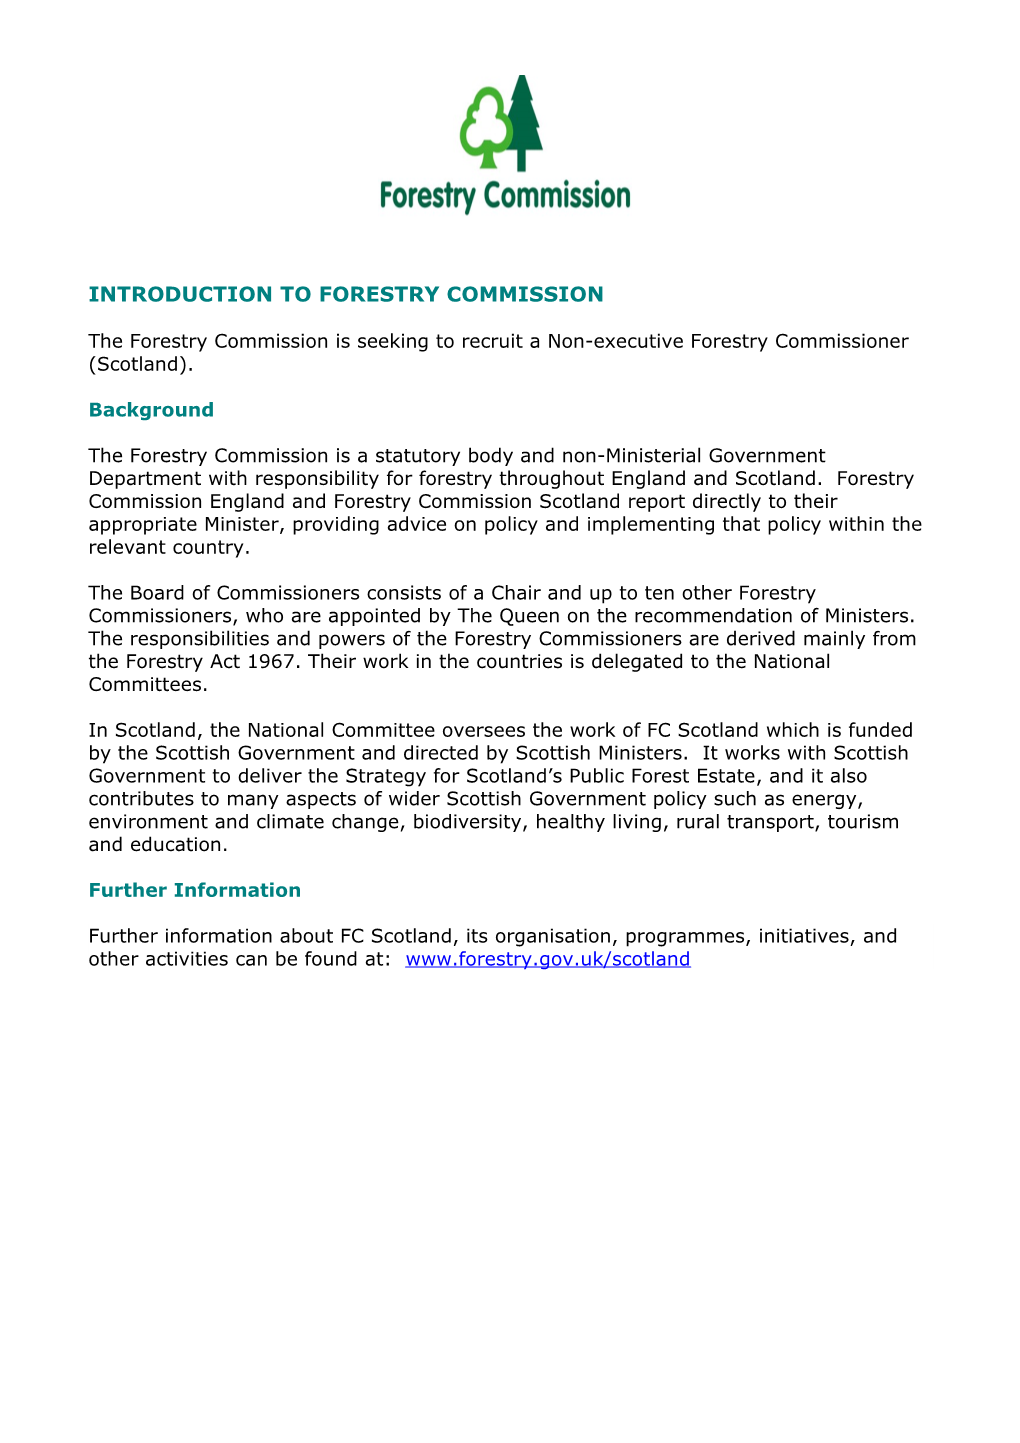 Introduction to Forestry Commission